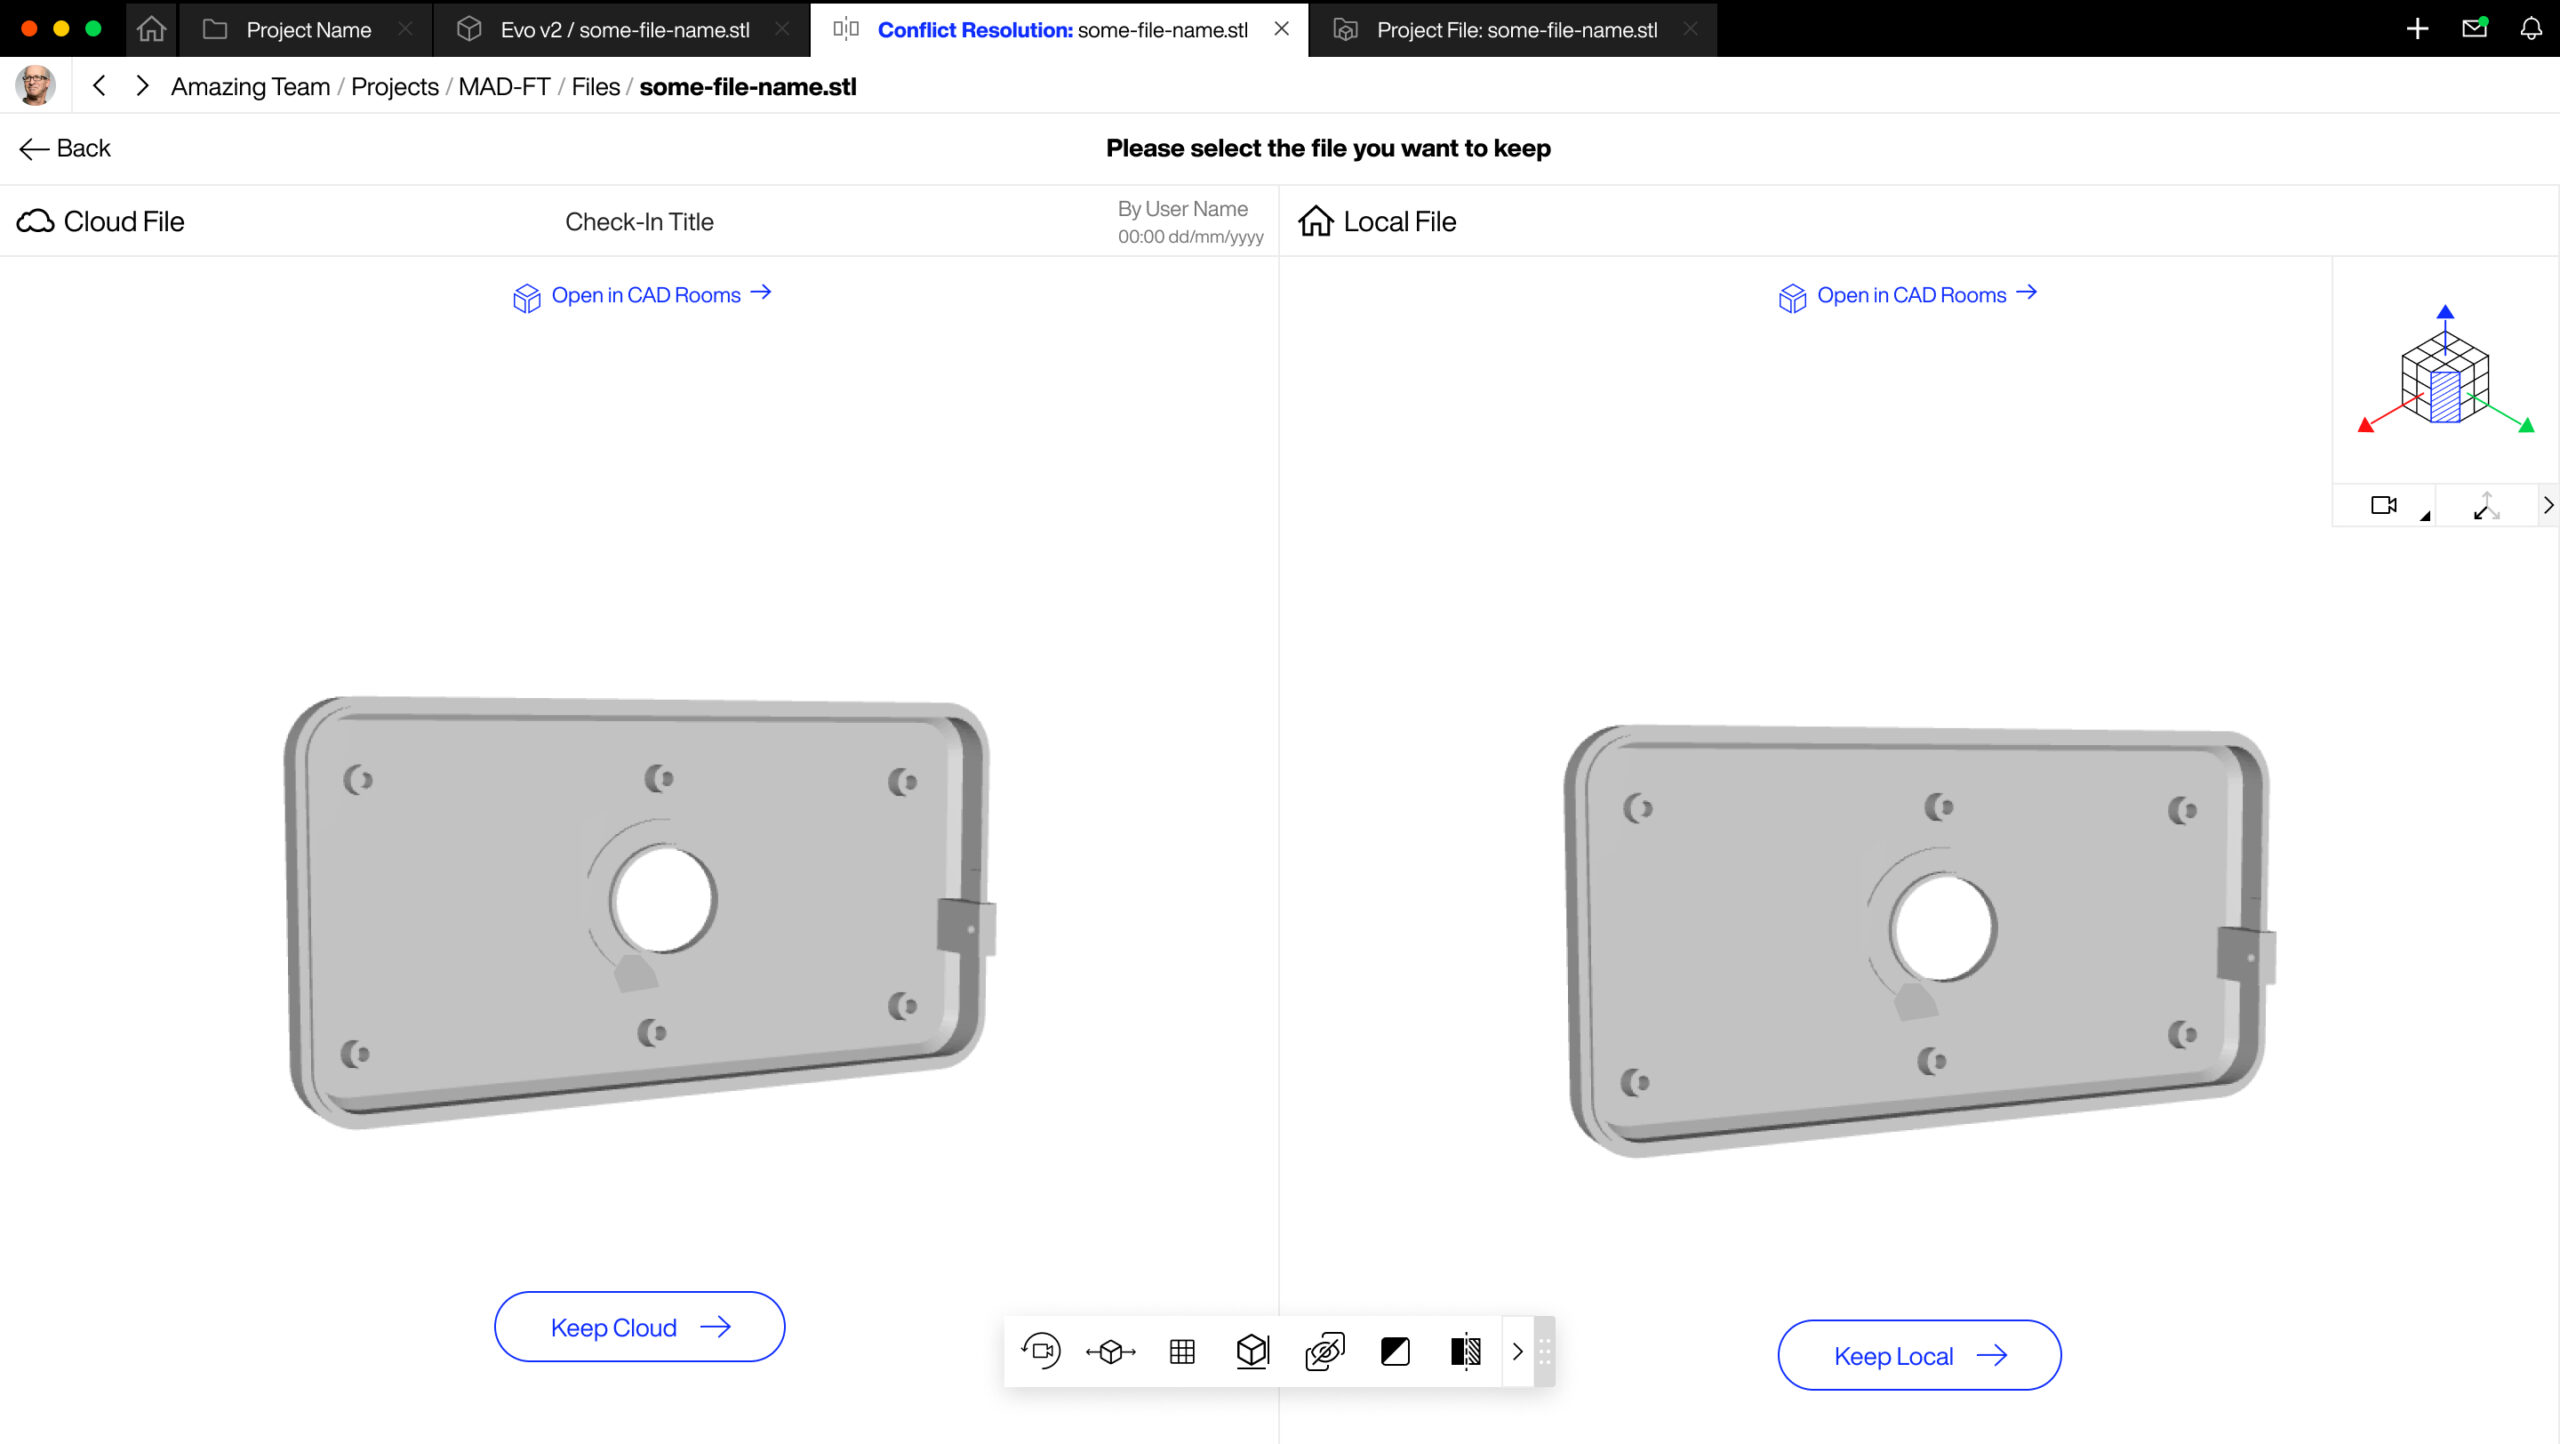 An image showing a conflict resolution interface with side-by-side 3D views of a CAD file for a mechanical part, presenting options to choose between a cloud version and a local version of the file.